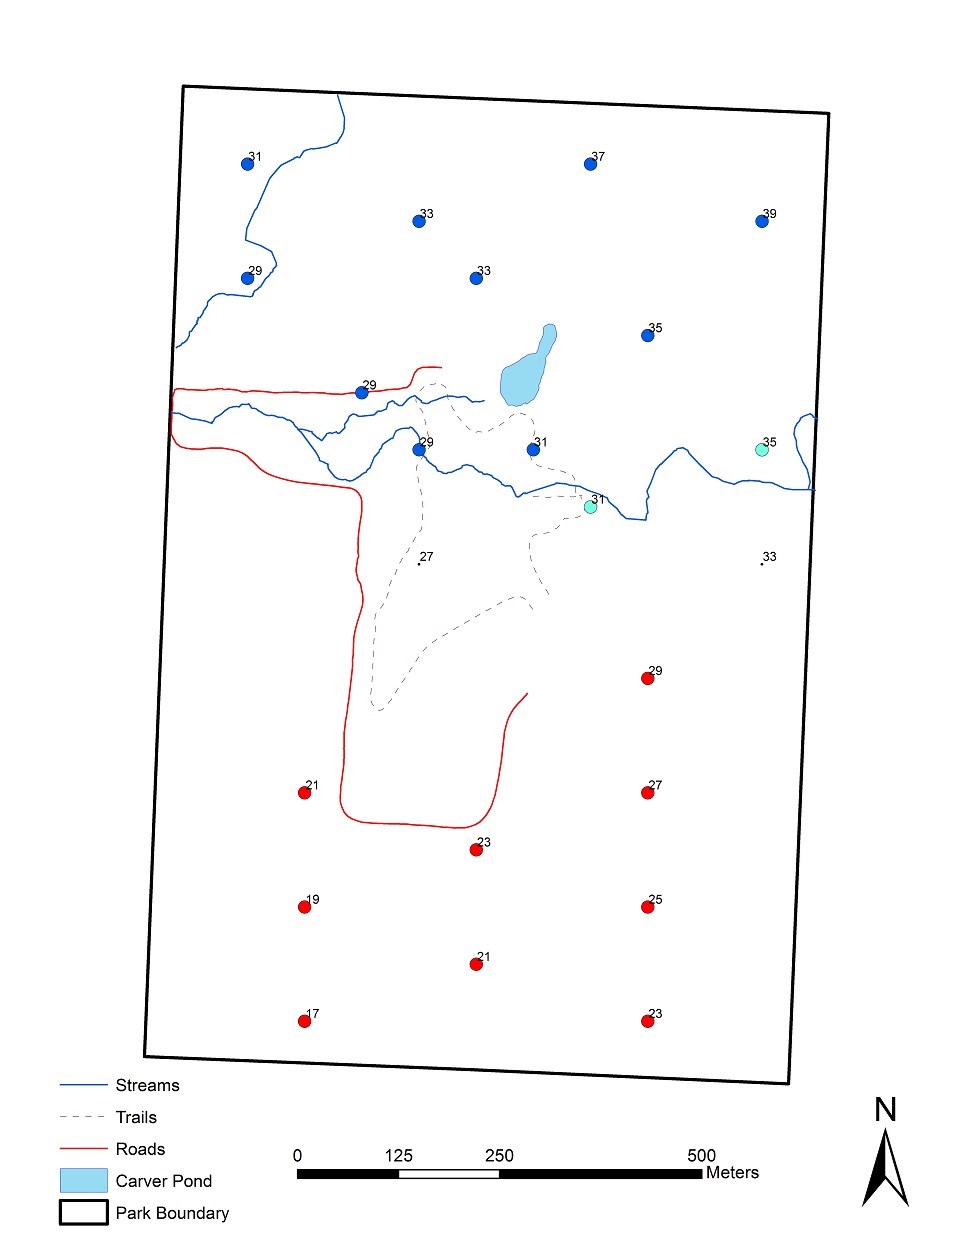 Hot Spot Analysis Map of data collected by volunteers at George Washington Carver National Monument